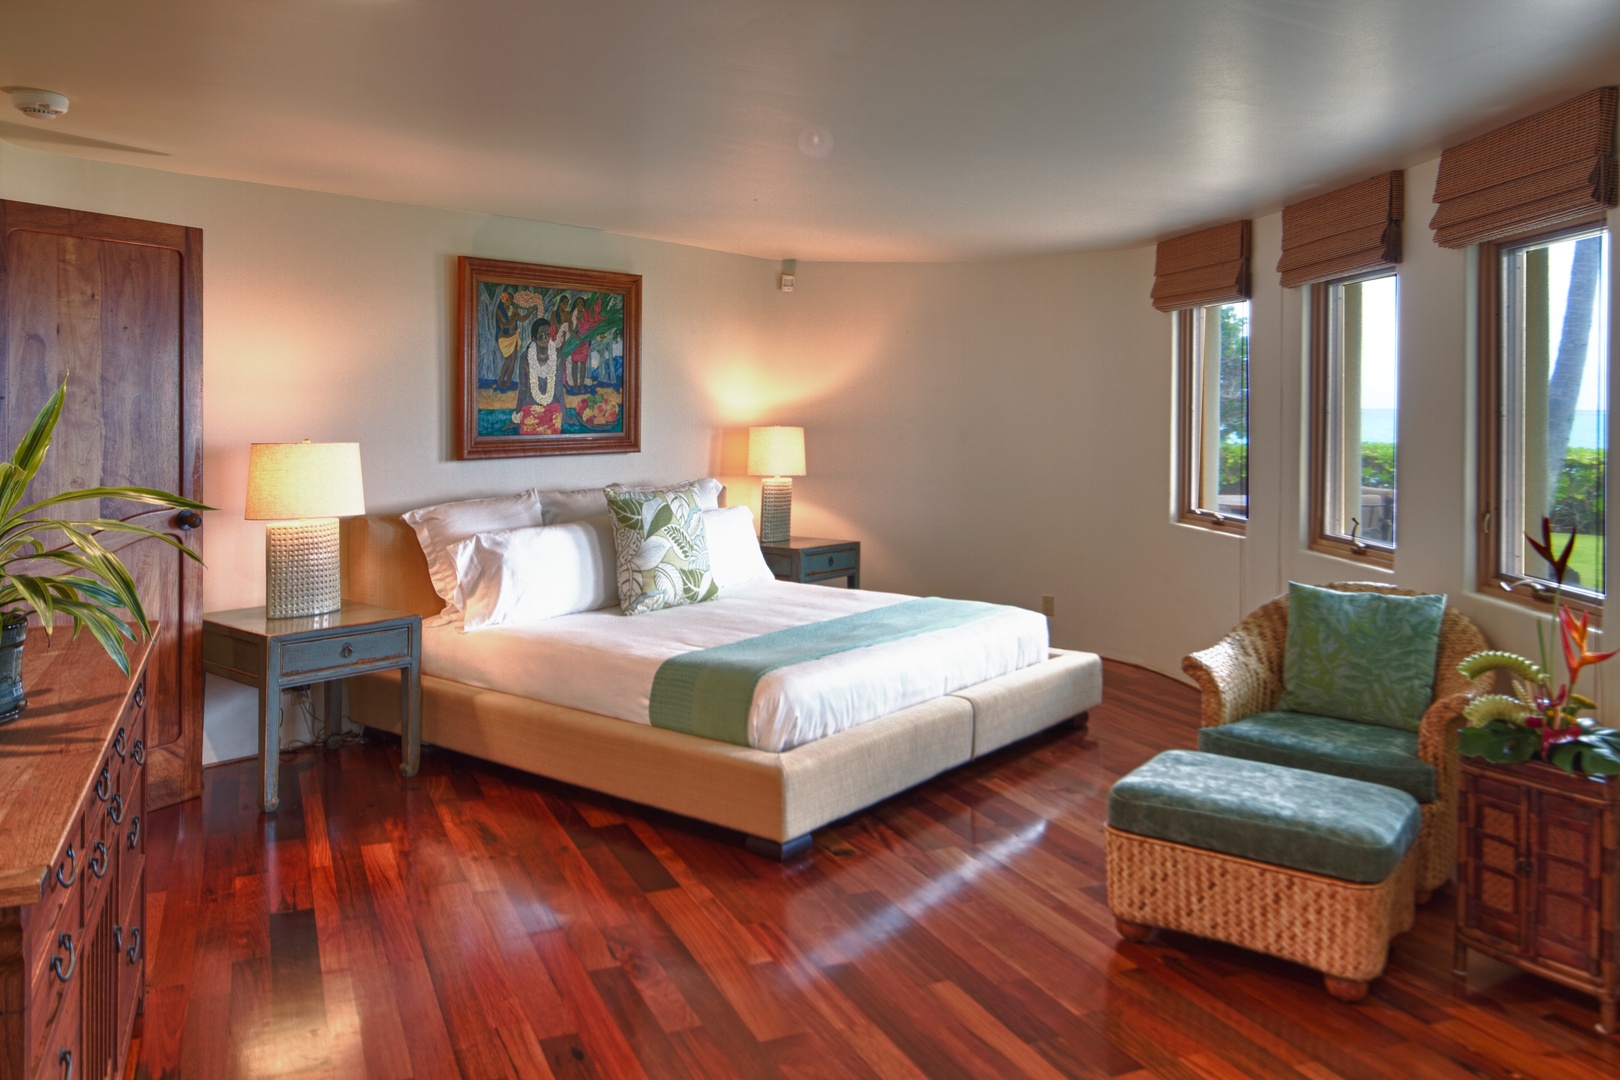 Kailua Vacation Rentals, Paul Mitchell Estate- 5 Bedroom* - Guest Bedroom in Main House, ground level